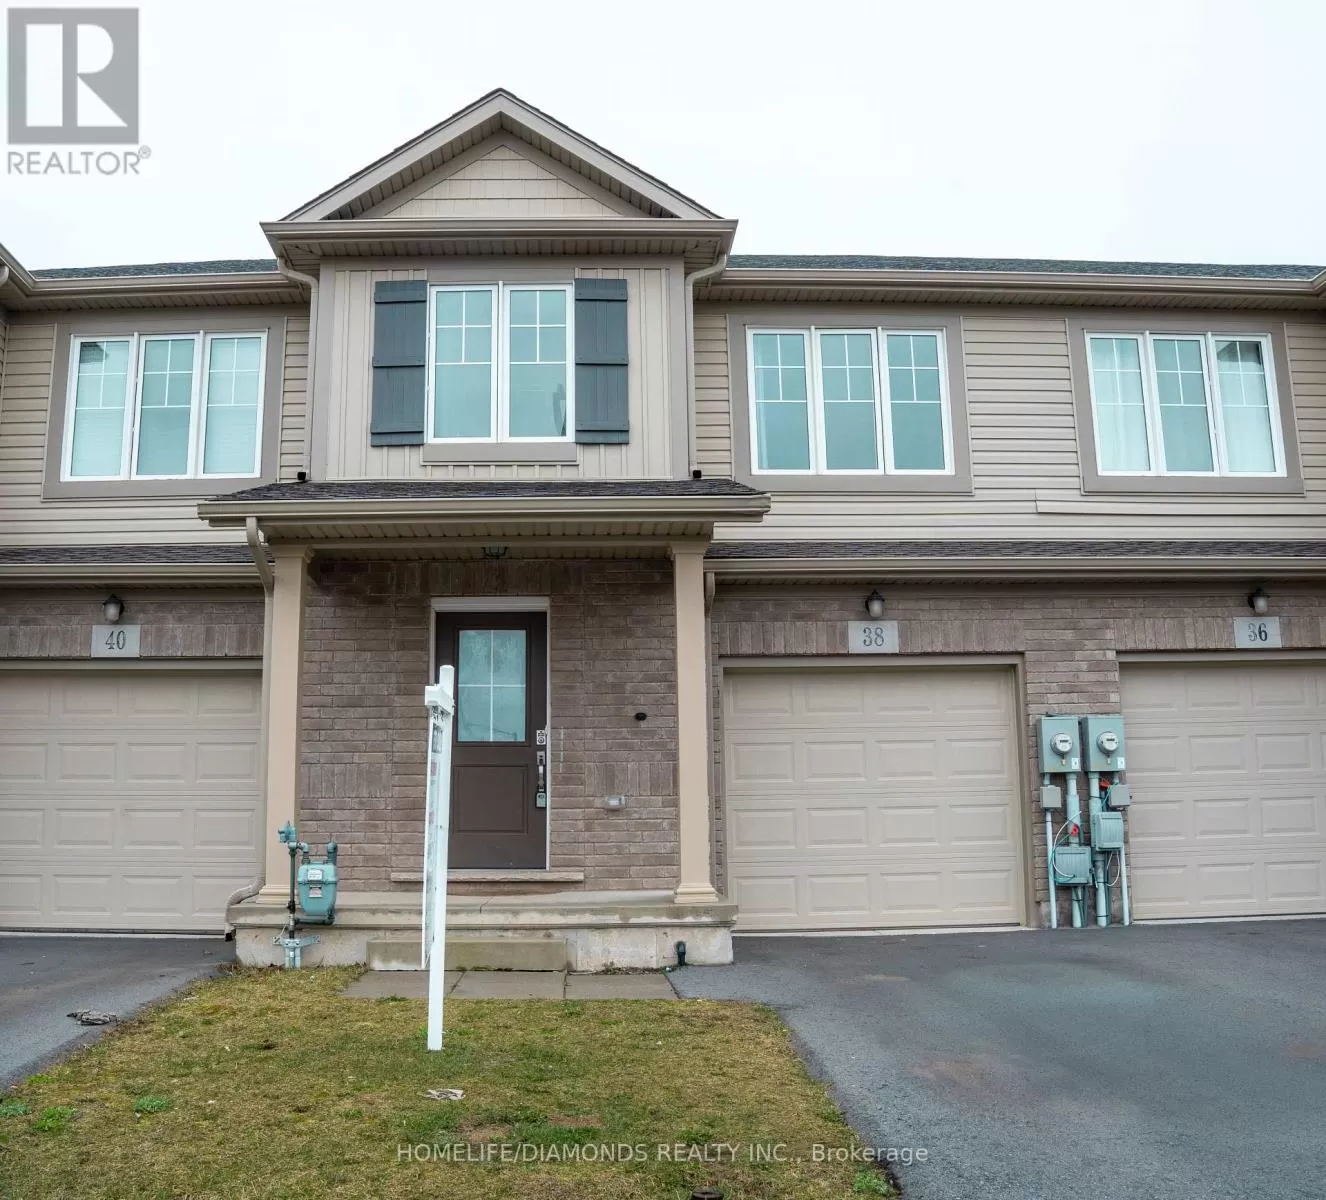 Row / Townhouse for rent: 38 Damude Avenue, Thorold, Ontario L0S 1K0